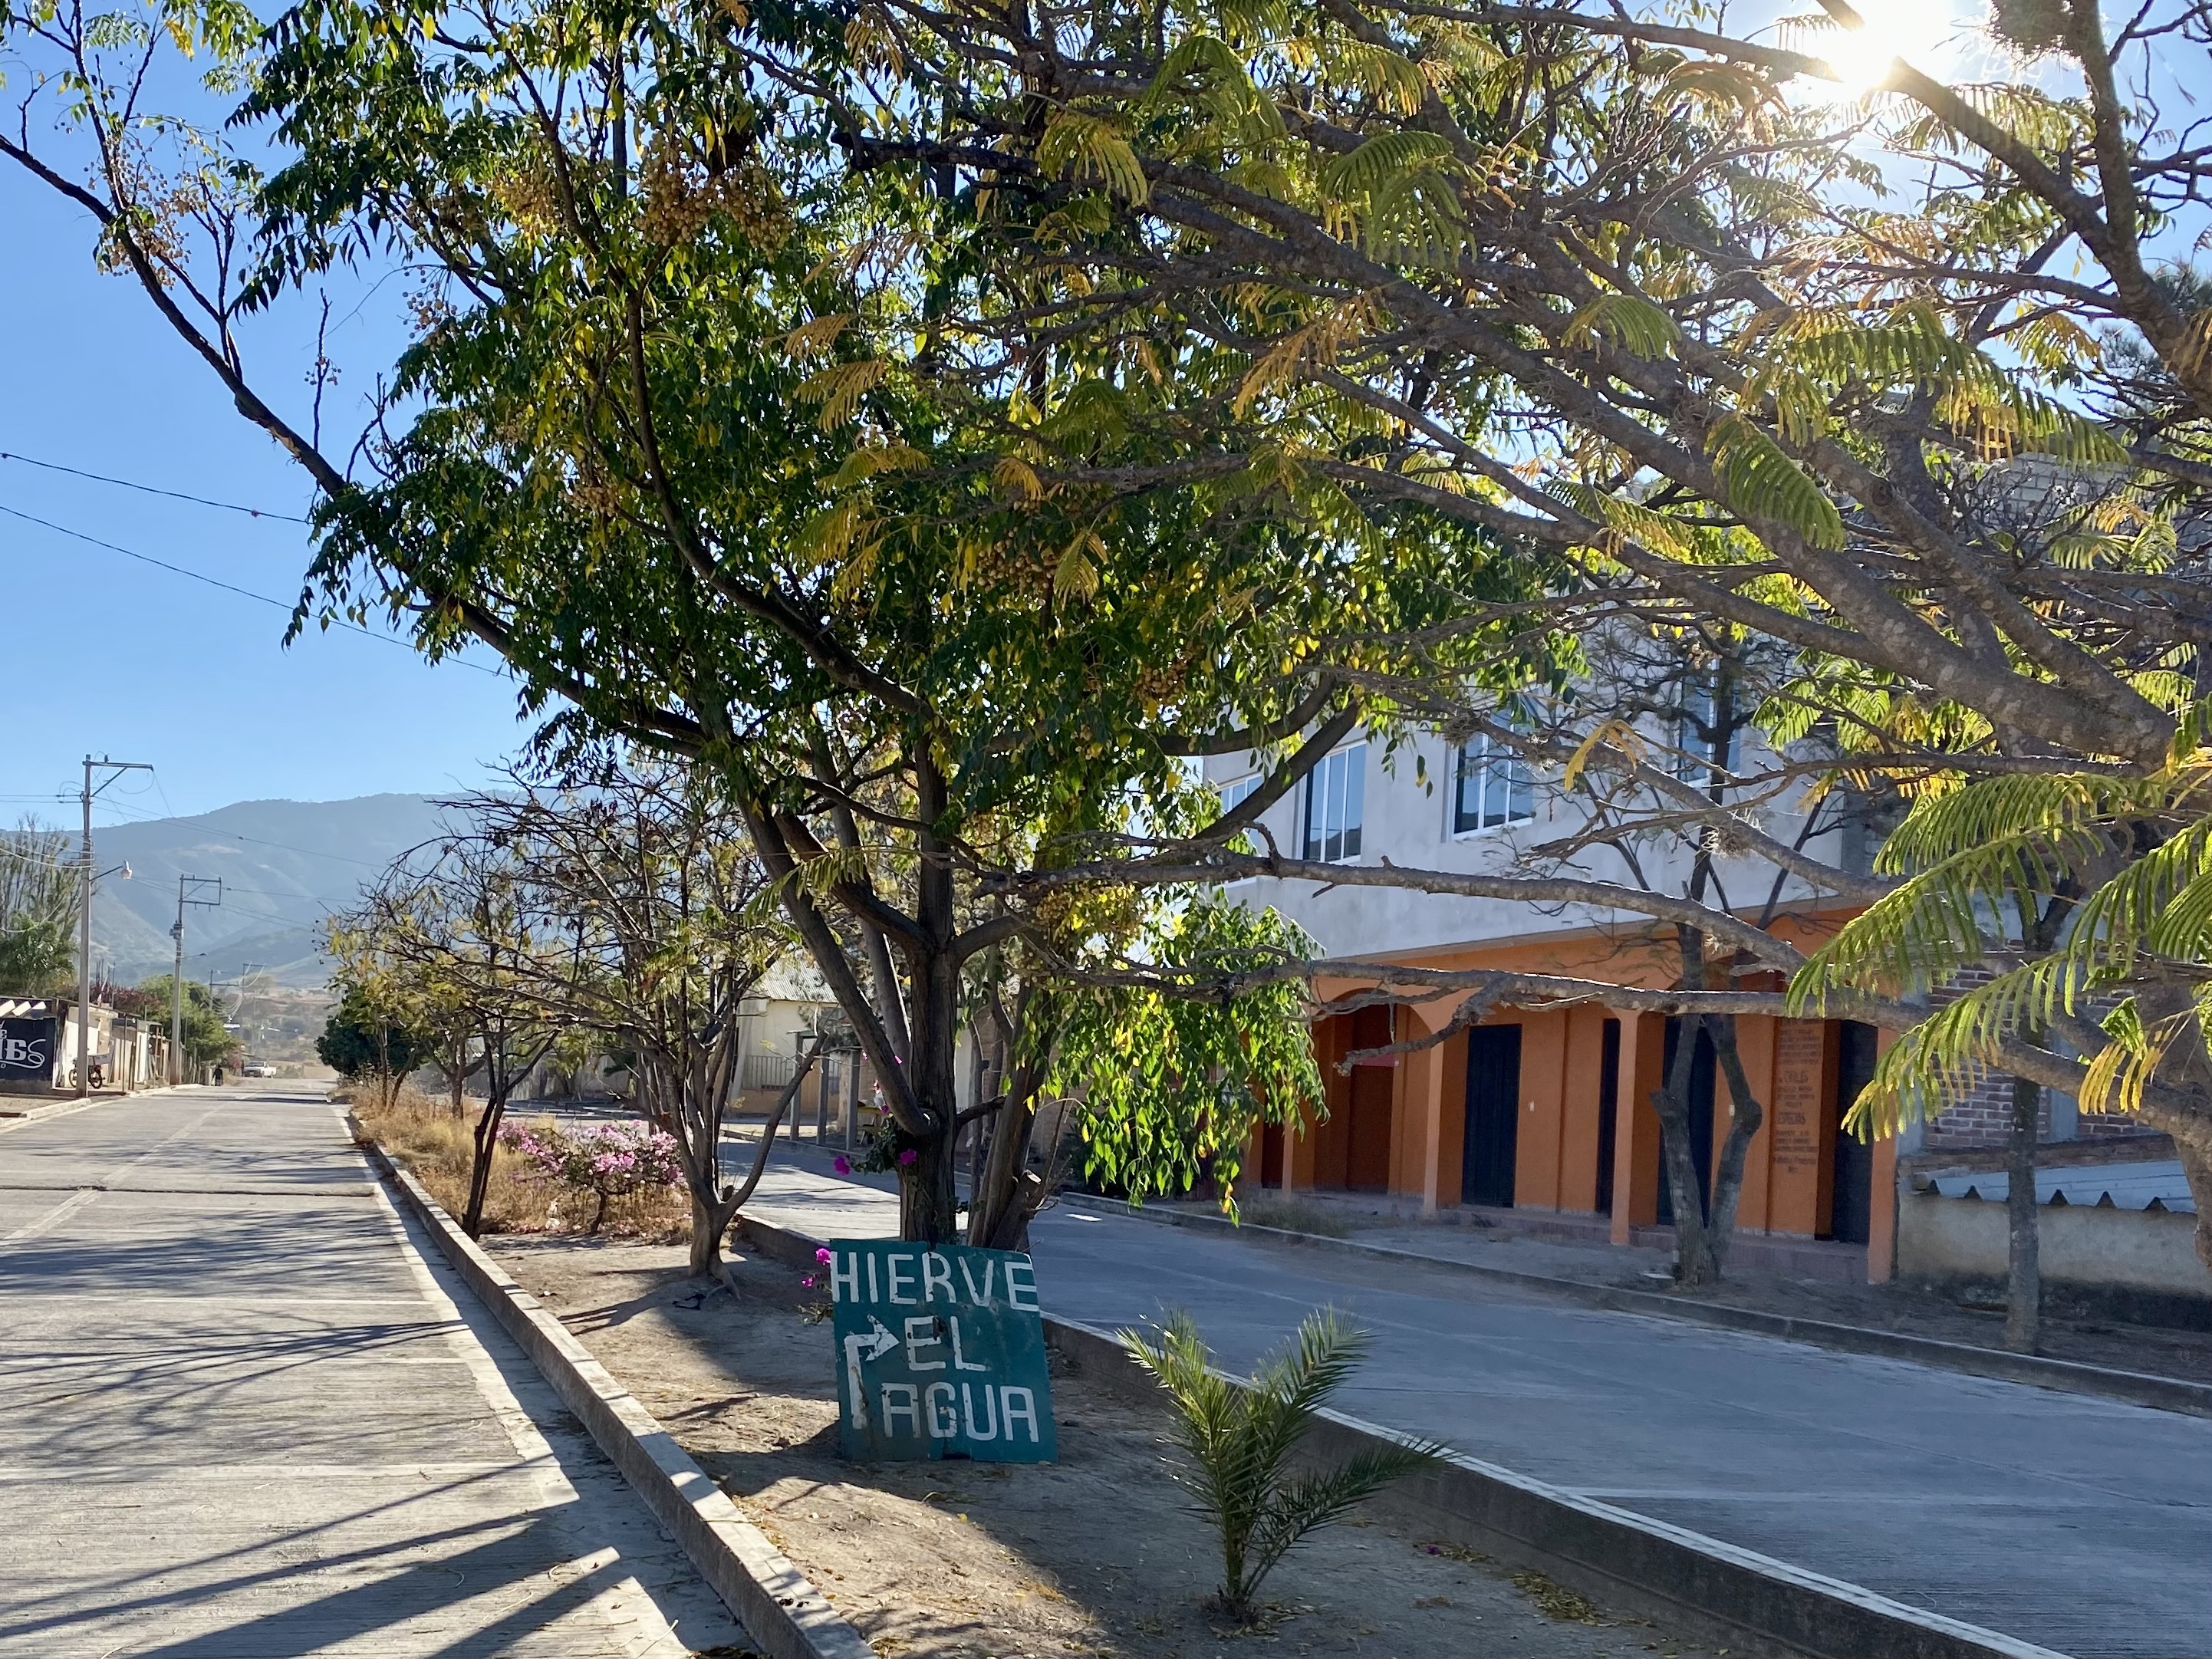 Two Gay Expats - Oaxaca - Hierve El Agua - Directional Signs